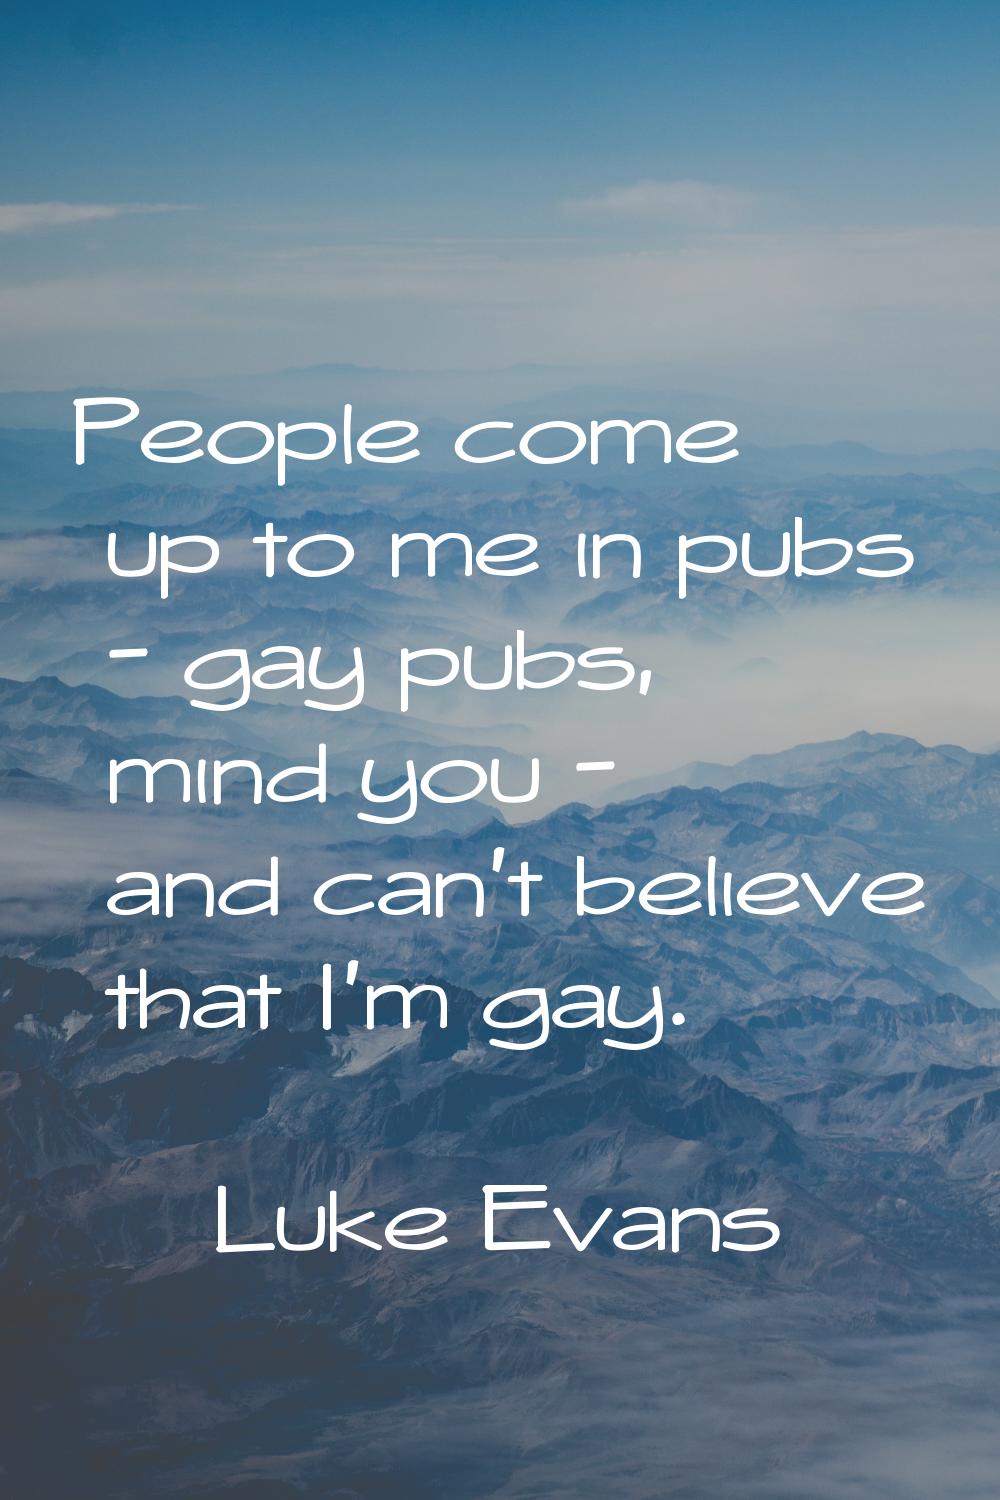 People come up to me in pubs - gay pubs, mind you - and can't believe that I'm gay.